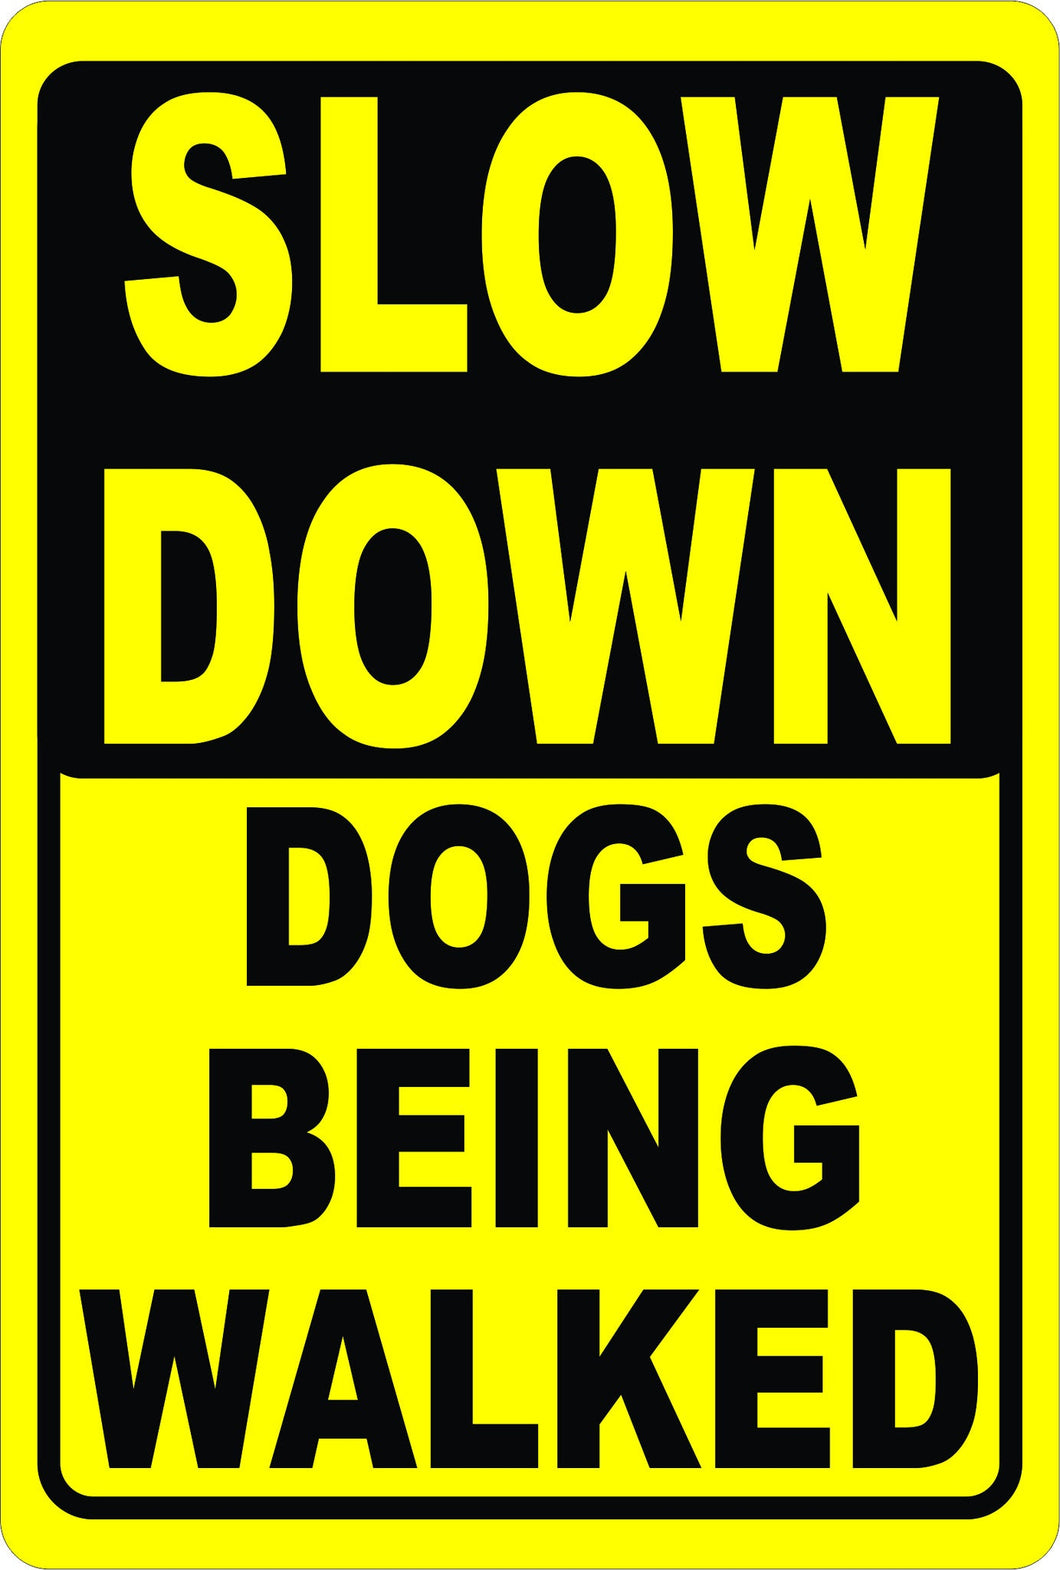 Slow Down Dogs Being Walked Sign